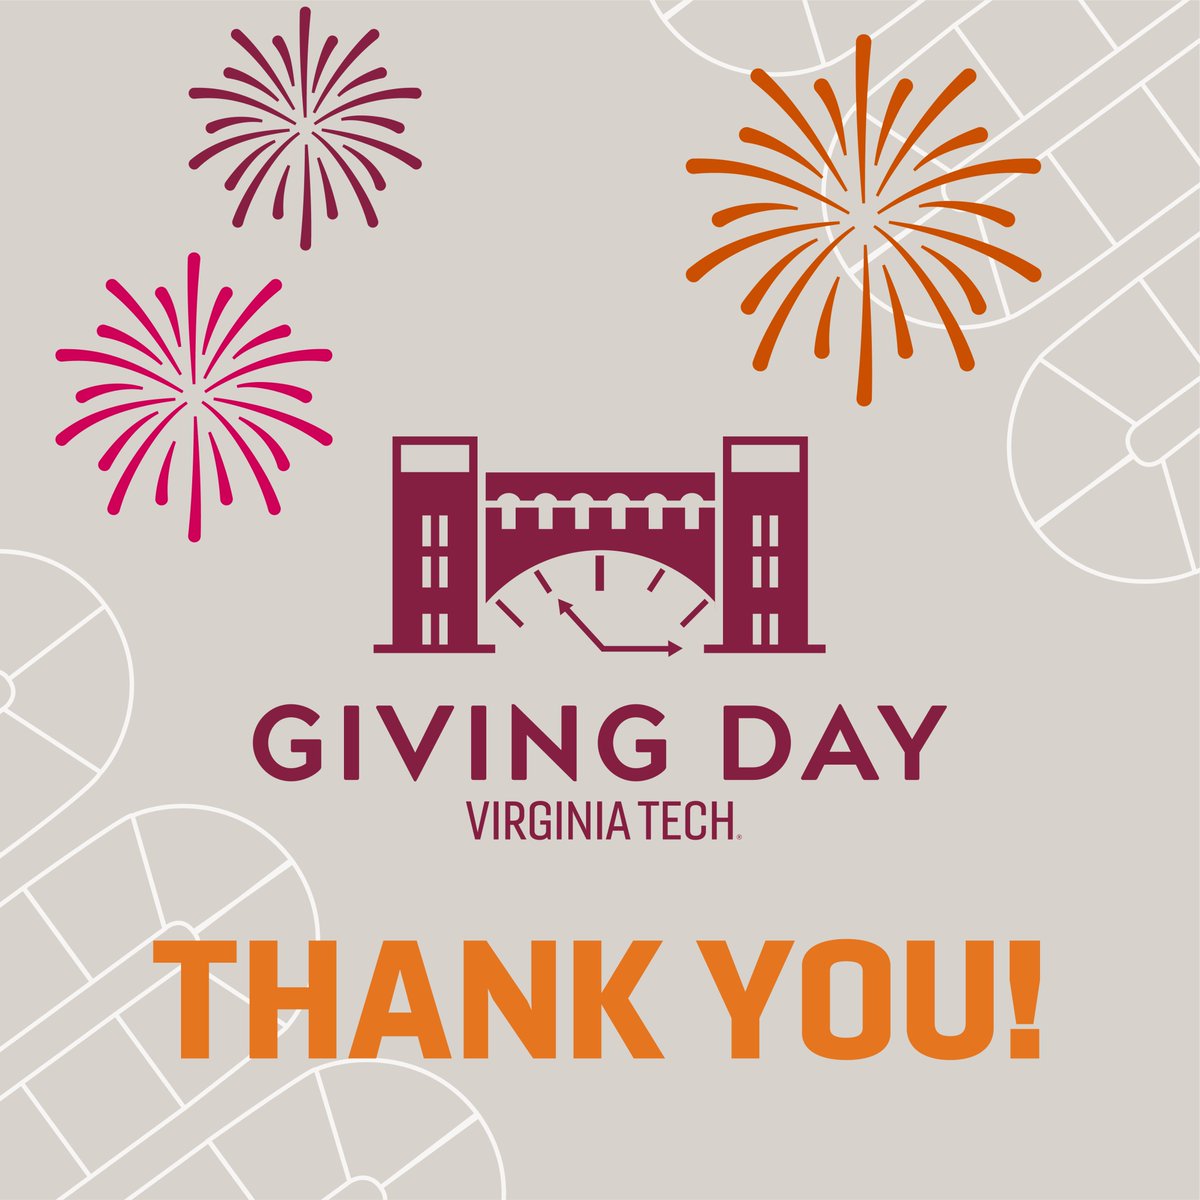 Game over! Thank you, CS and Hokie Nation for all your #utprosim spirit over the past 24 hours and every day. Every dollar you gave goes to student support. You make us all #hokieproud #vtgivingday